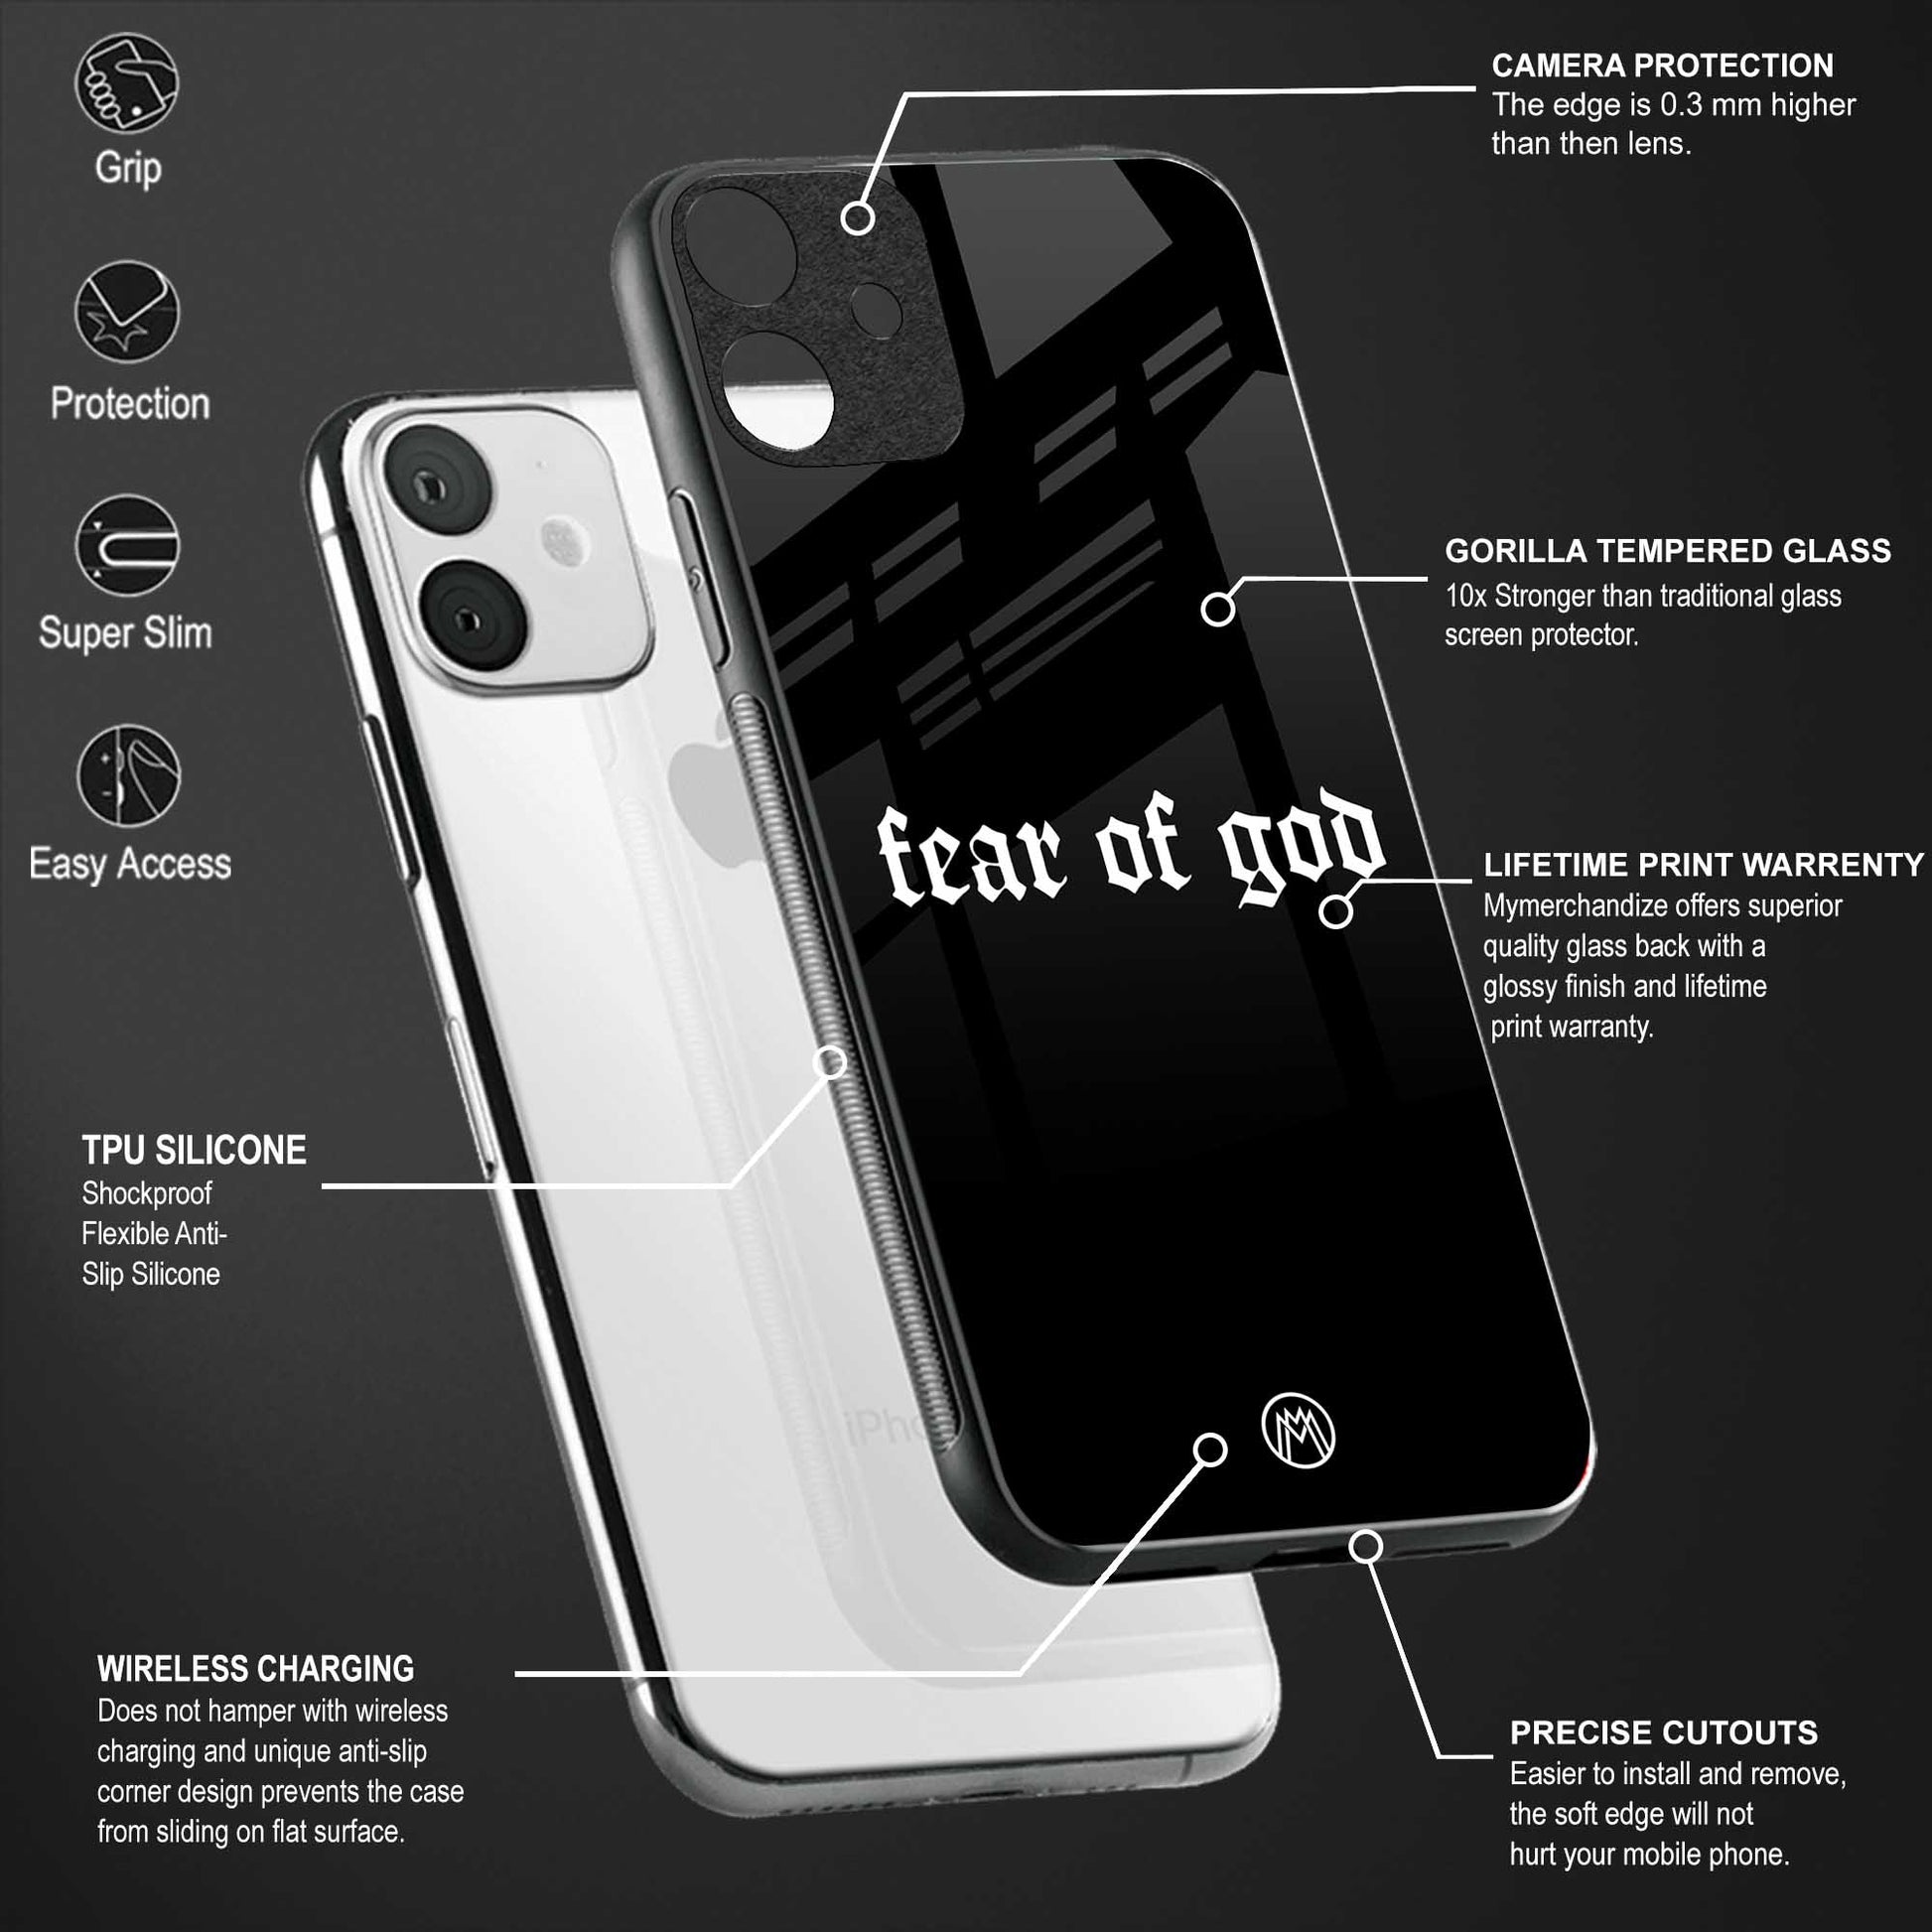 fear of god phone cover for oppo reno 2f